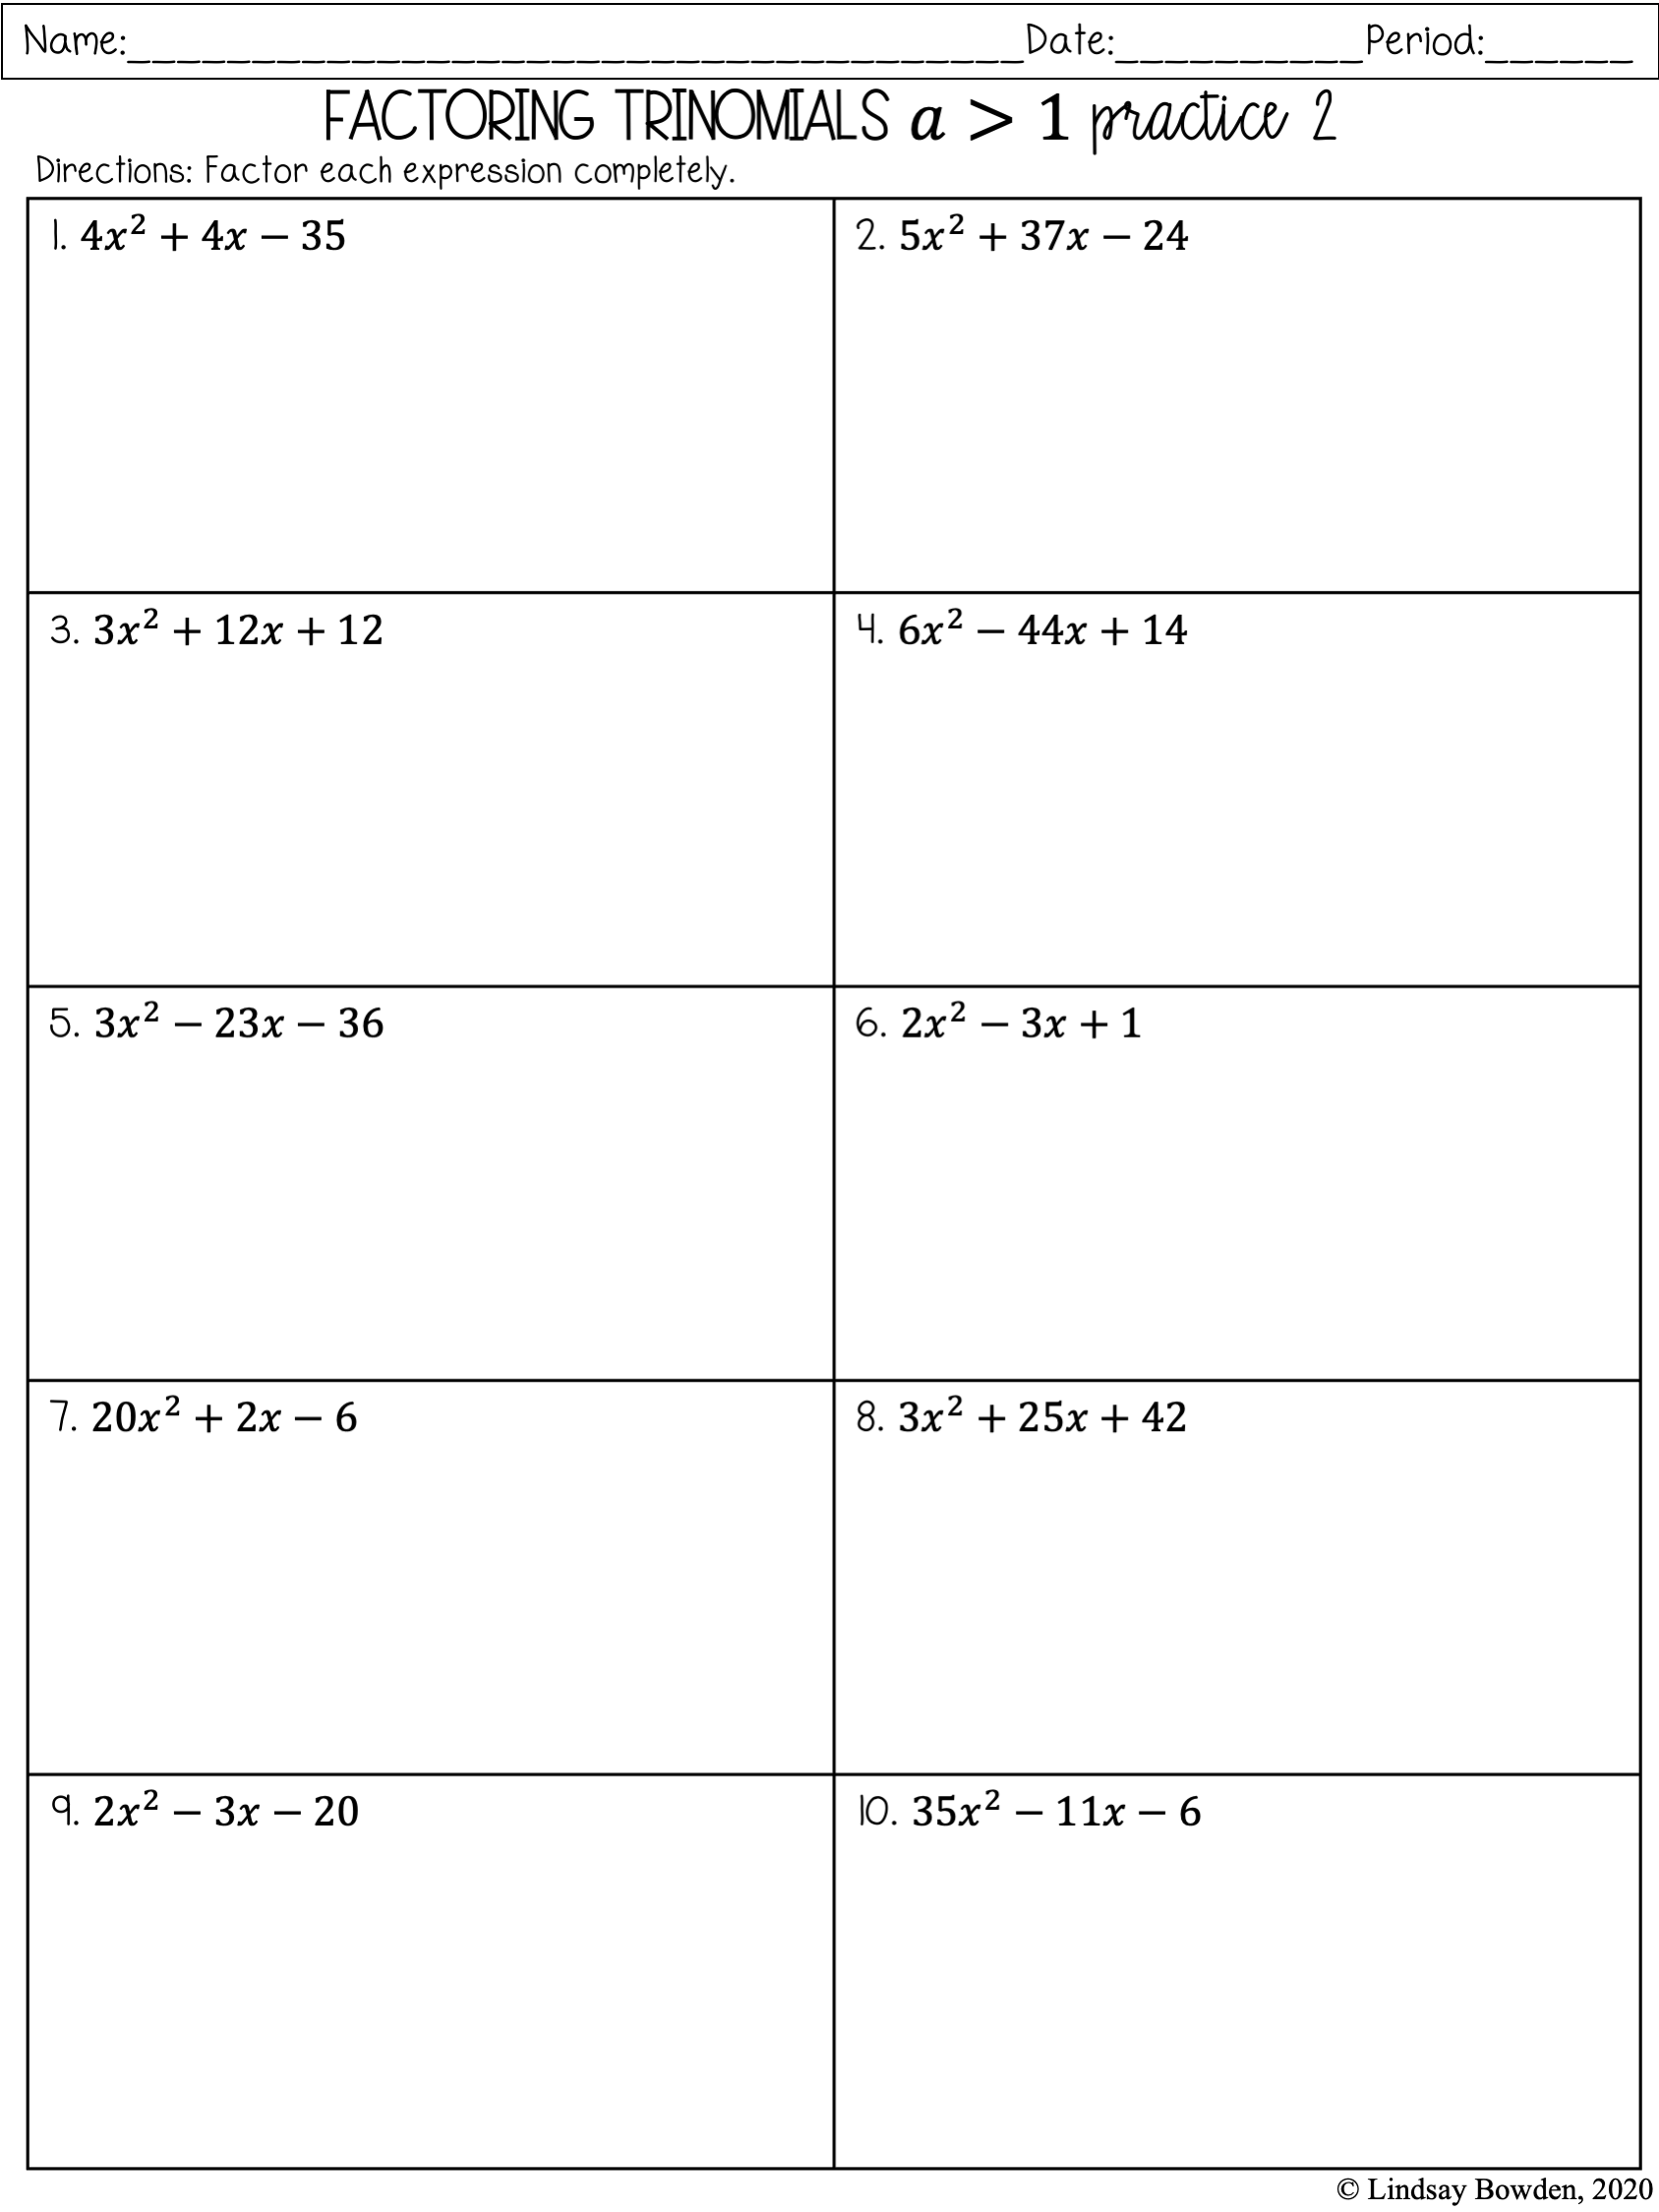 Factoring Polynomials Notes and Worksheets - Lindsay Bowden With Factoring By Grouping Worksheet